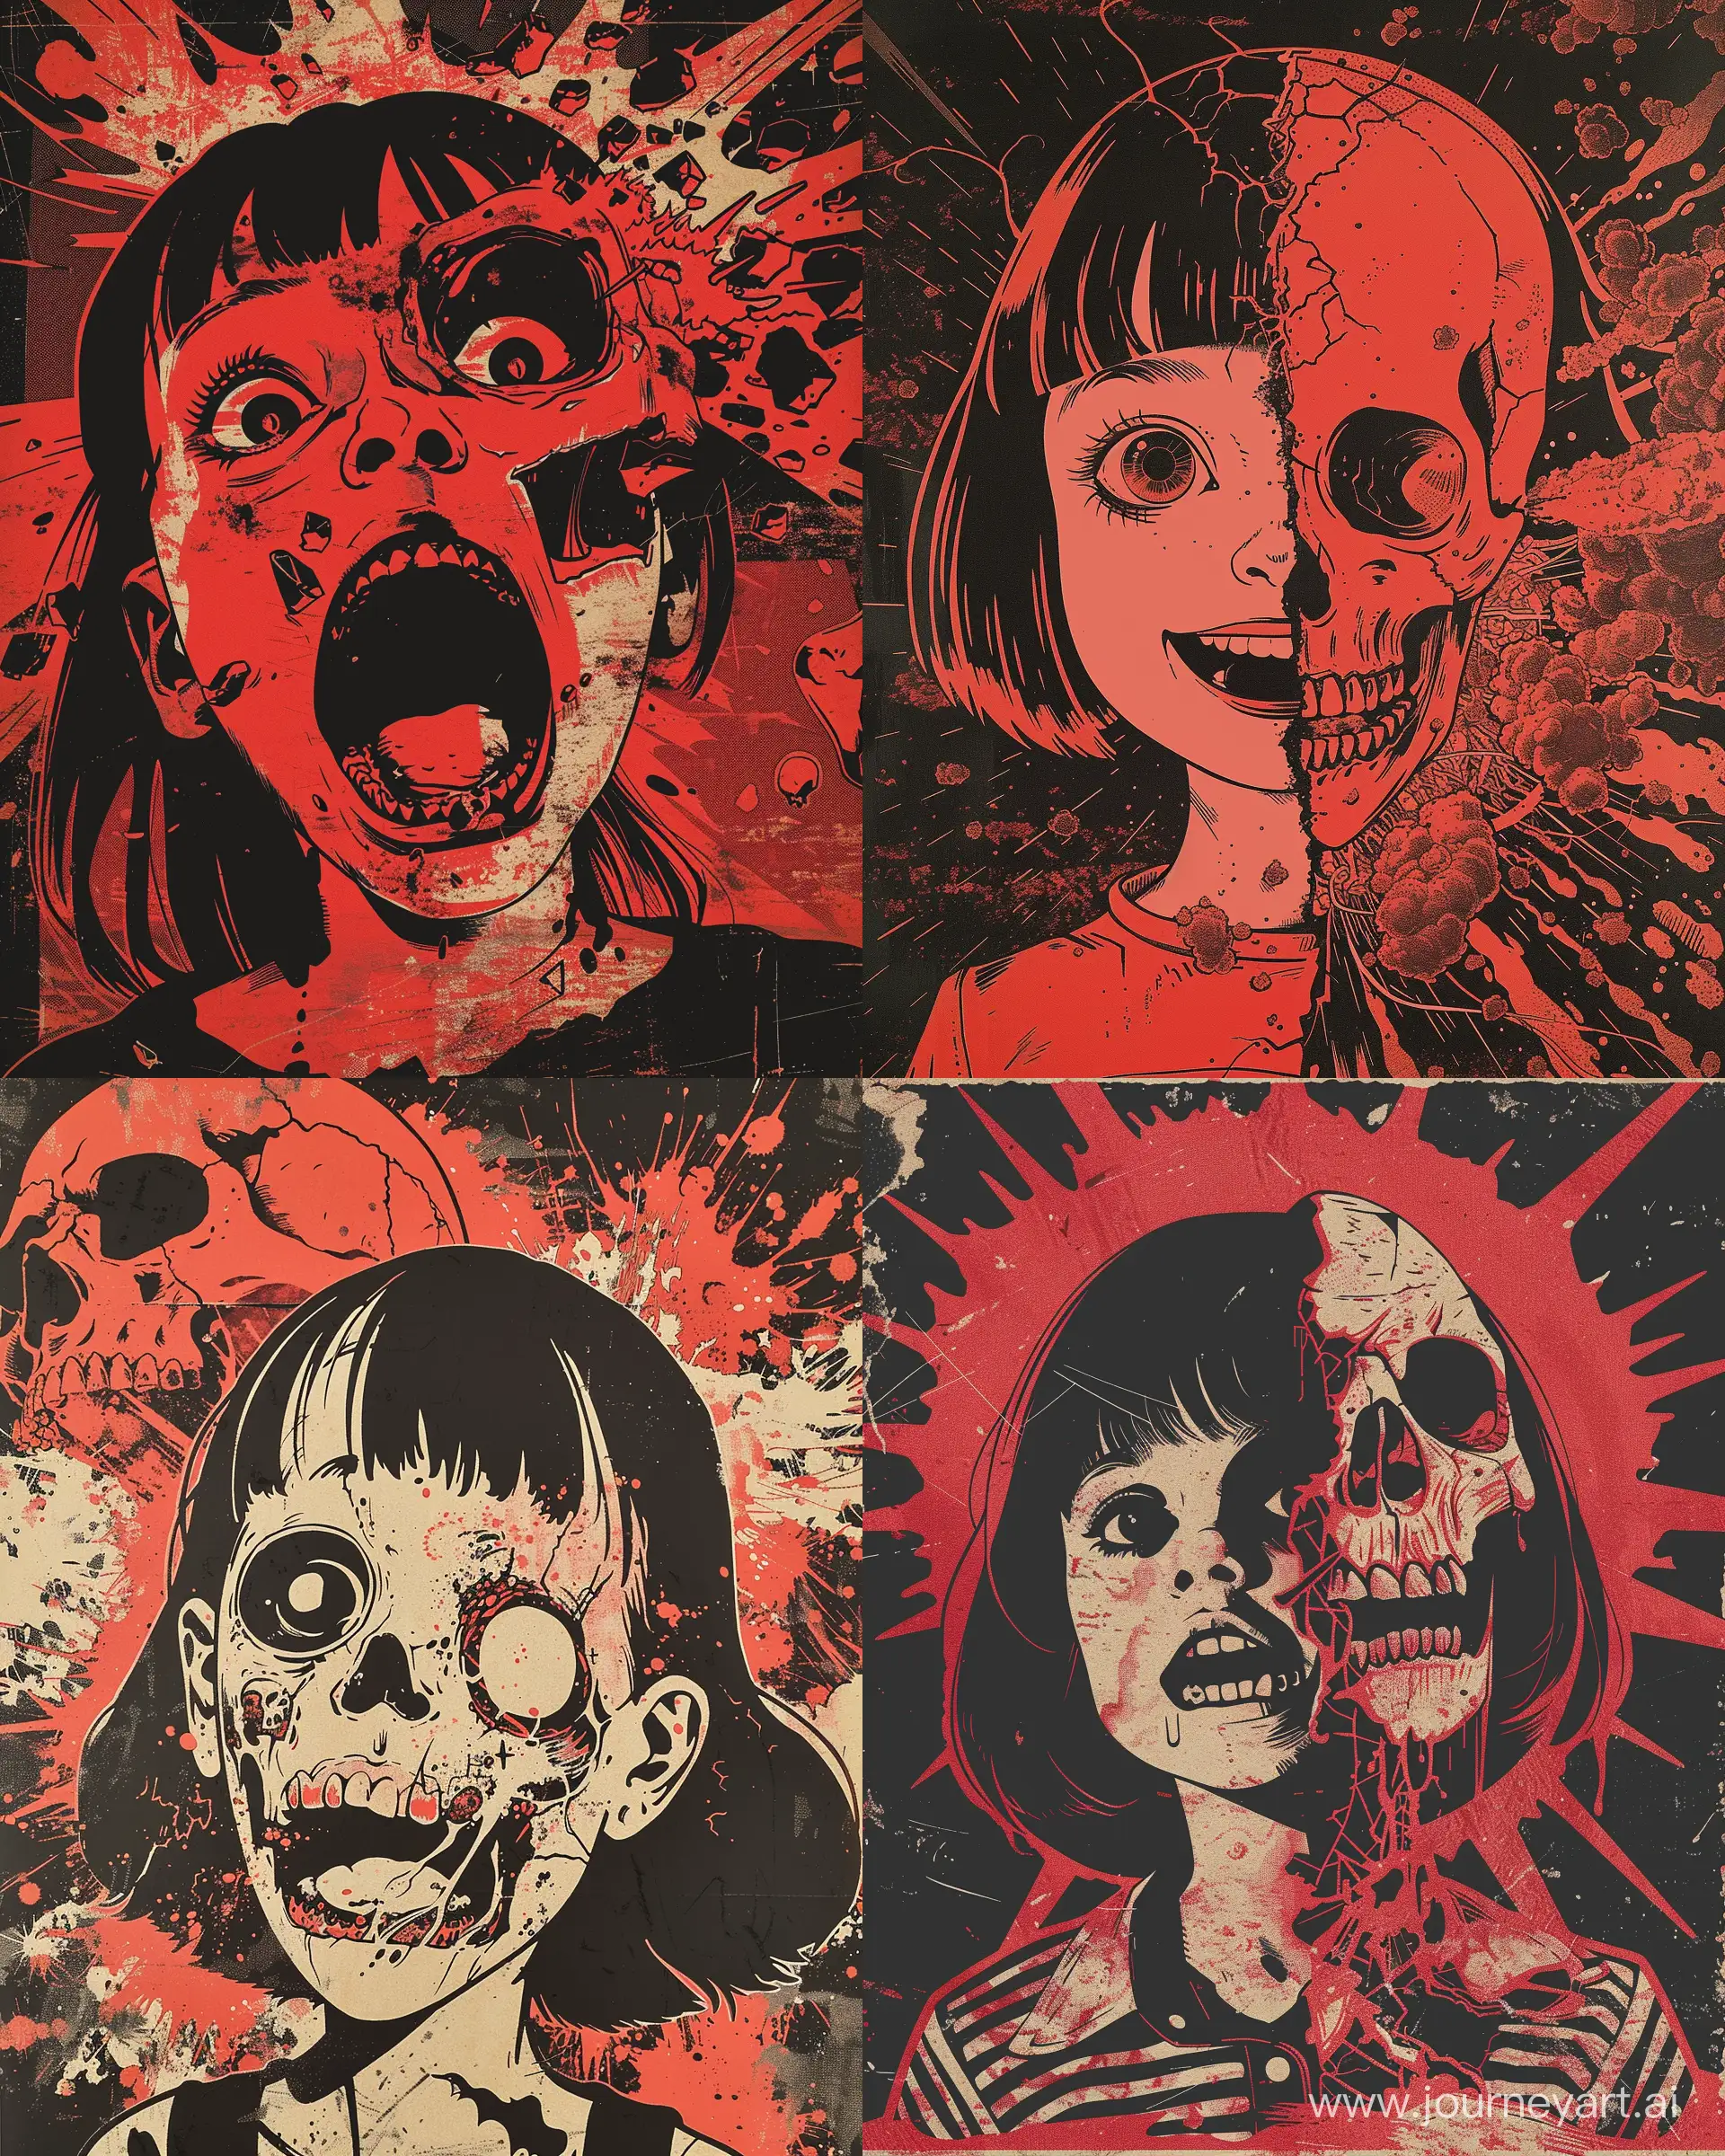 Distorted-Horror-Art-Cute-Girl-with-Open-Face-and-Skull-in-Fractured-Depiction